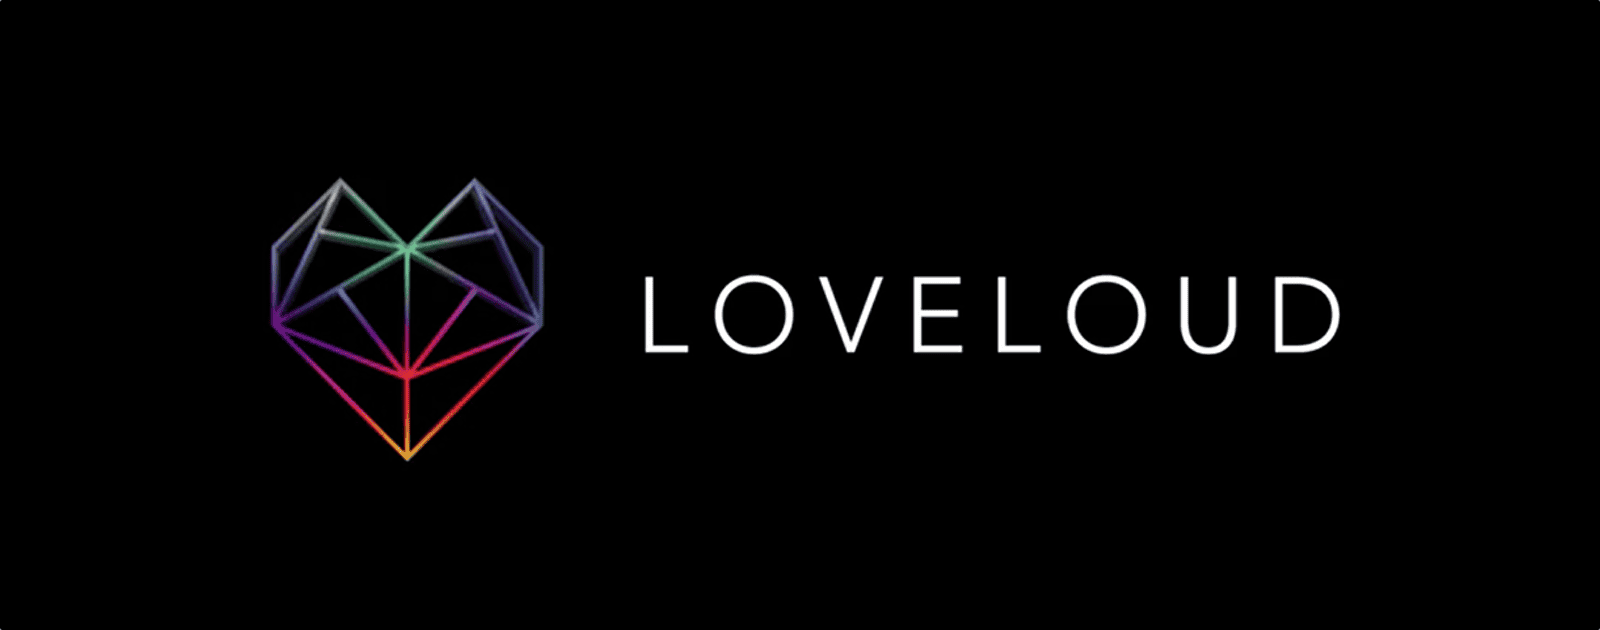 Tim Cook Will Speak at 2018 LOVELOUD Festival This Saturday